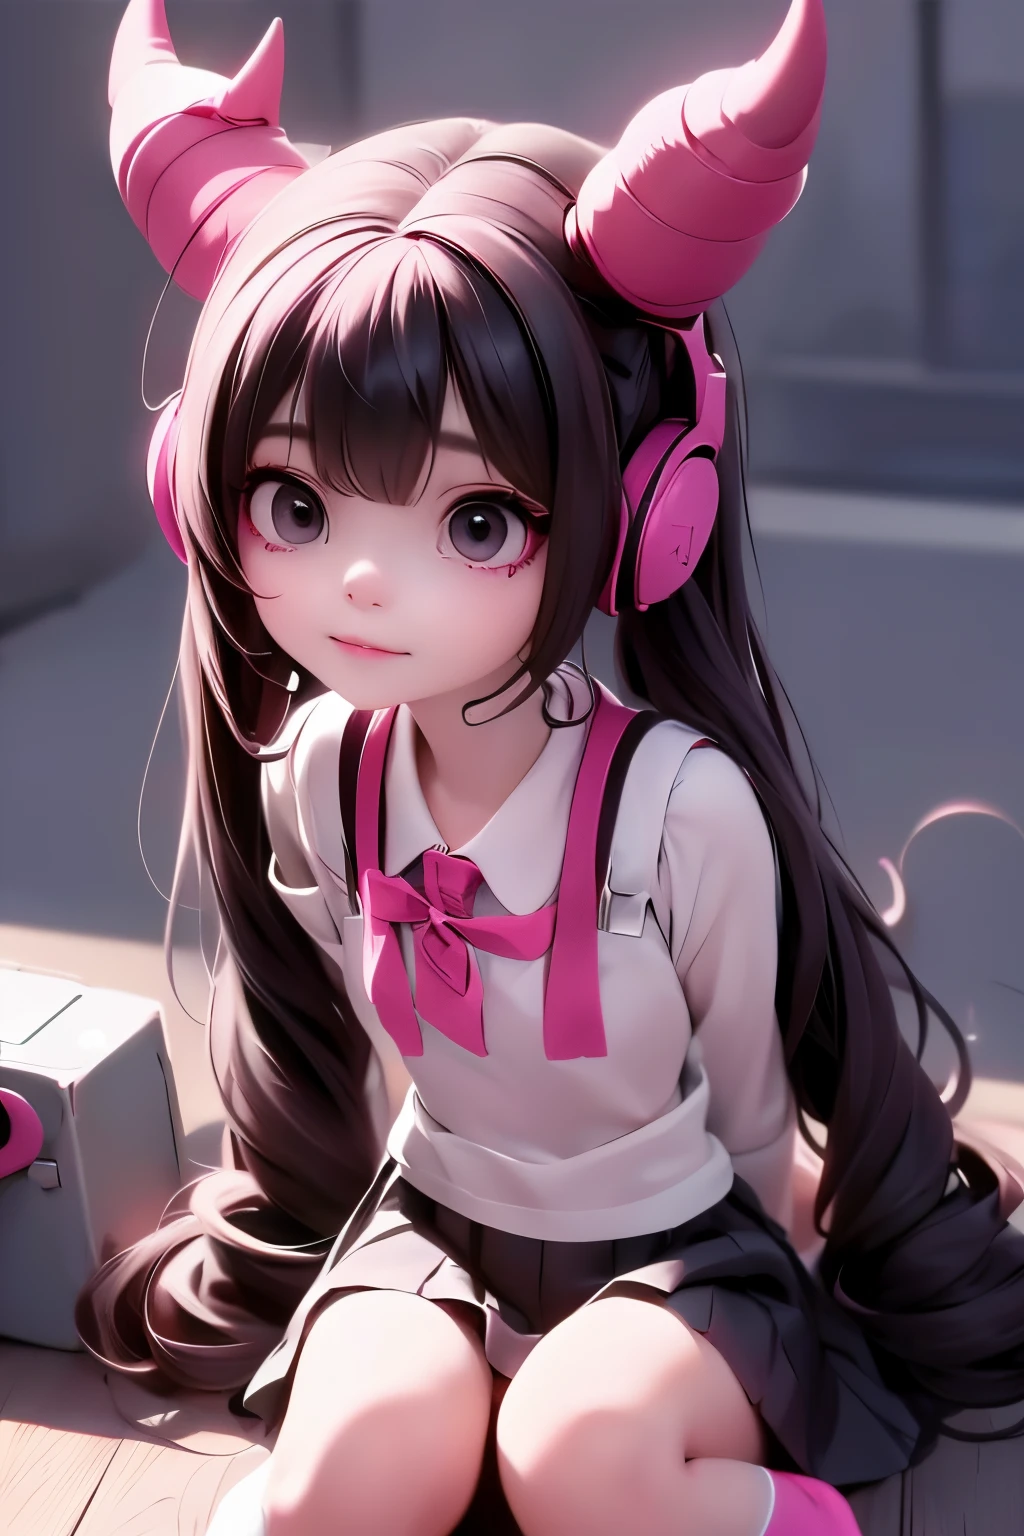 A (gehörnt) demon girl with heAdphones And A bAckpAck sitting on the ground, Anime goth gehörnt demon girl, weAring skirt And crop lAce shirt, Drossel, weAring heAdphones, ulzzAng, sfw